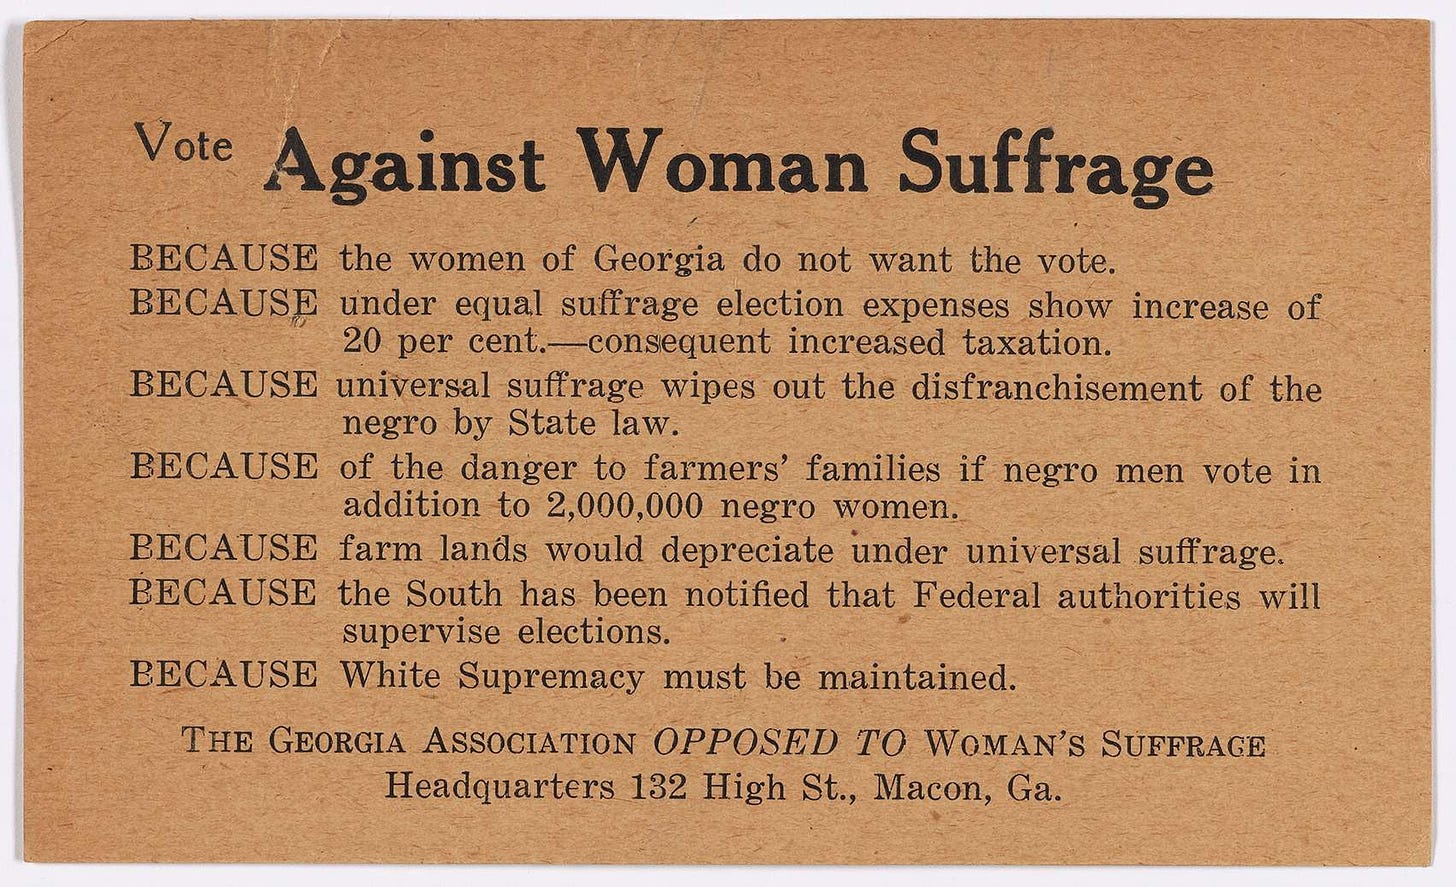 May be an image of text that says 'Vote Against Woman Suffrage BECAUSE the women of Georgia do not want the vote. BECAUSE under equal suffrage election expenses show increase of 20 per cent.-consequent increased taxation. BECAUSE universal suffrage wipes out the disfranchisement of the negro by State law. BECAUSE of the danger to farmers' families if negro men vote in addition to 2,000,000 negro women. BECAUSE farm lands would depreciate under universal suff suffrage. rage. BECAUSE the South has been notified that Federal authorities will supervise elections. BECAUSE White Supremacy must be THE GEORGIA ASSOCIATION OPPOSED To WOMAN'S SUFFRAGE Headquarters 132 High St., Macon, Ga. maintained'